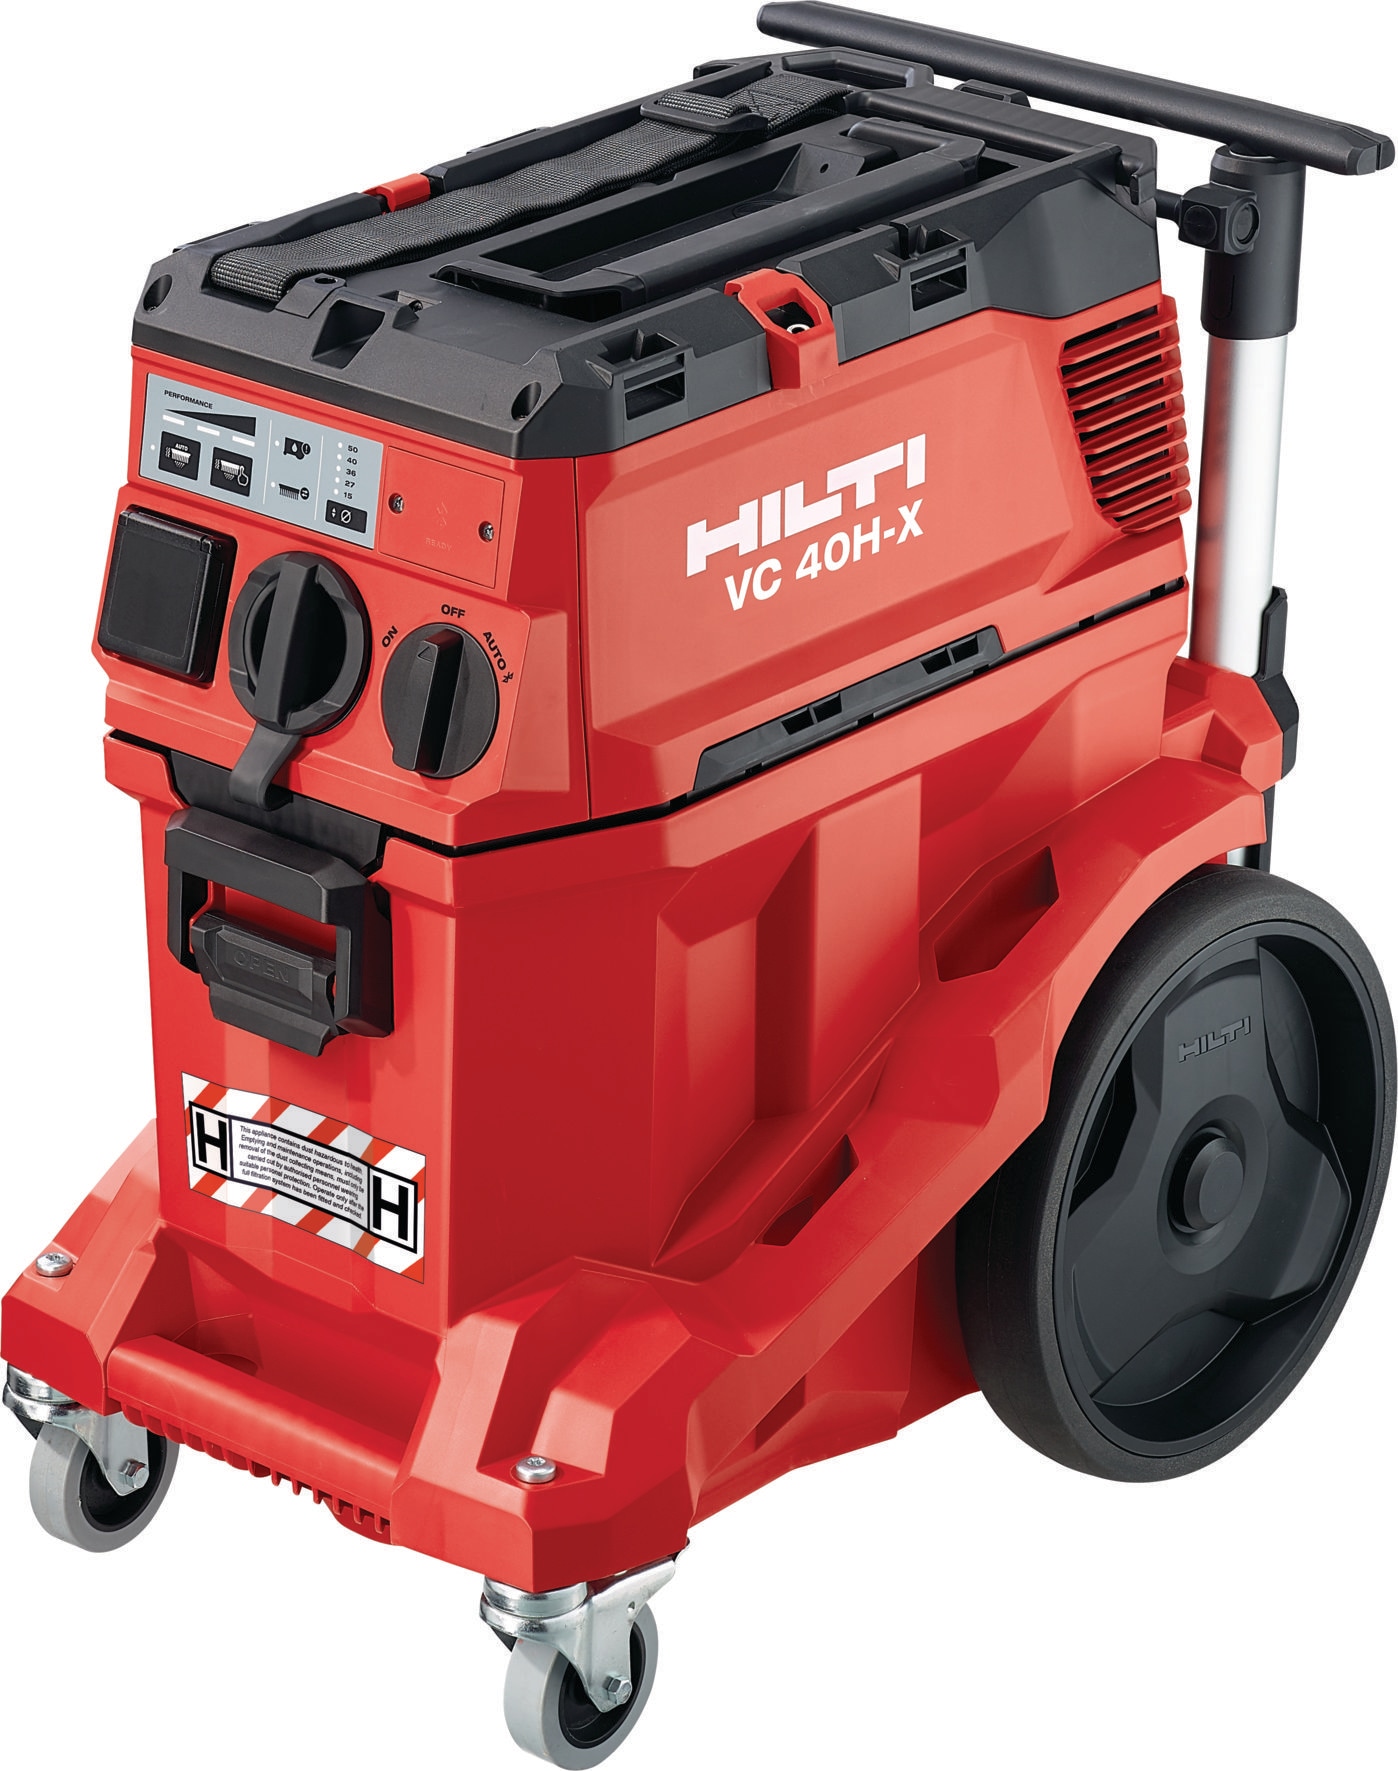 VC 40H-X Wet/dry H-class dust collector - Jobsite Vacuum Cleaners - Hilti  Finland